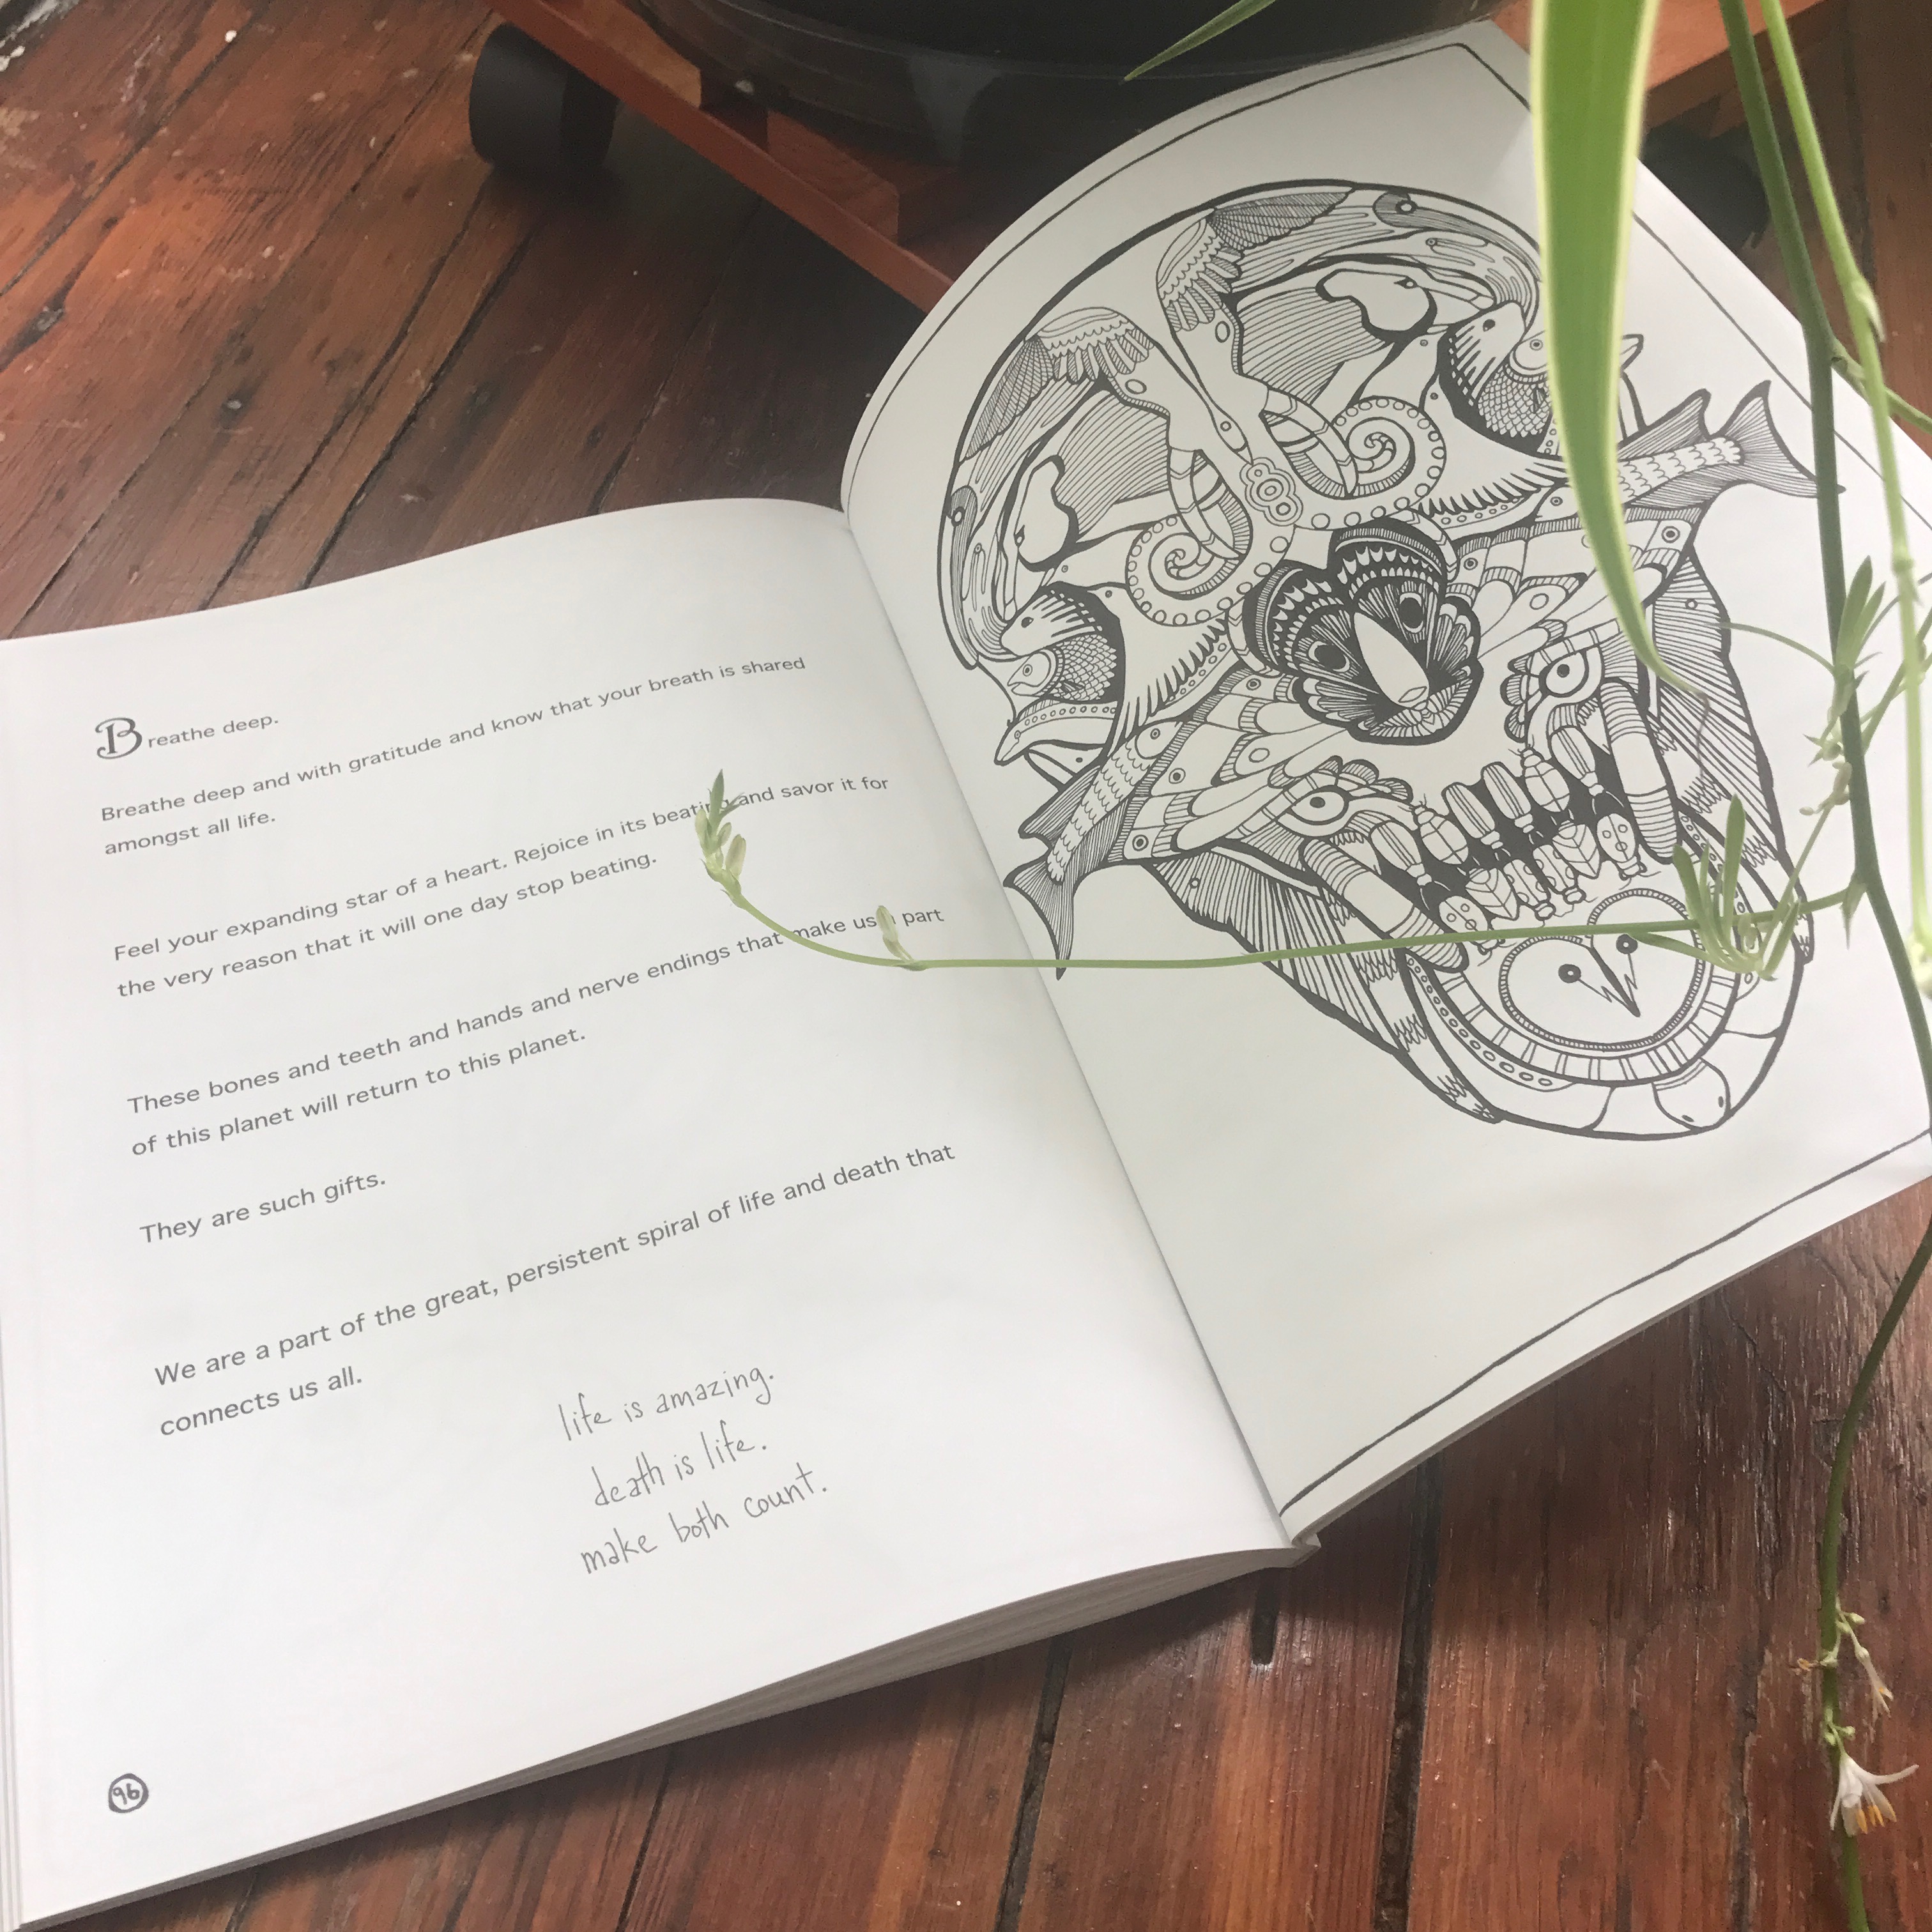 Everything Dies: A Coloring Book About Life!